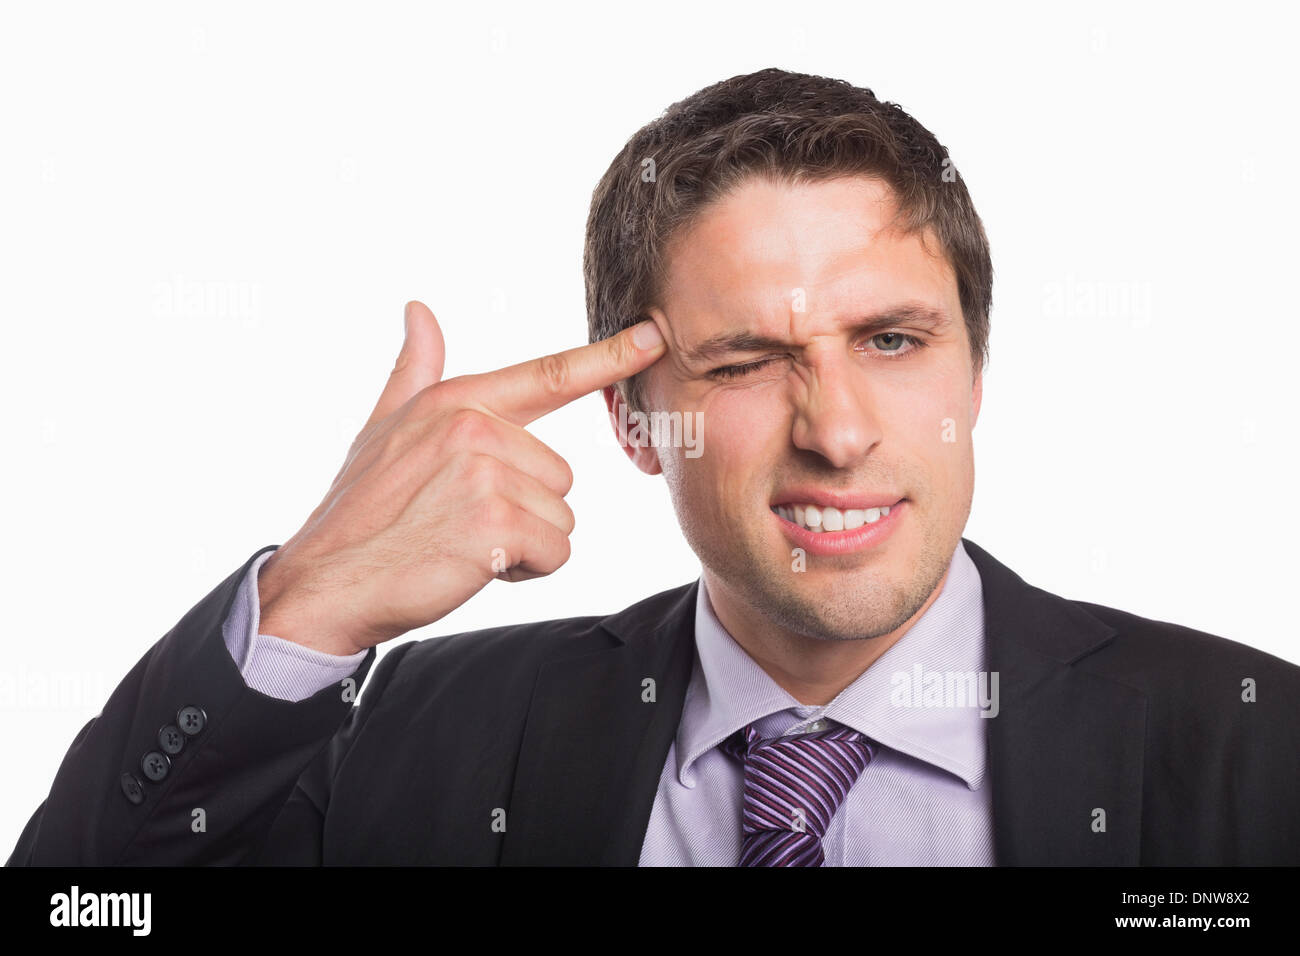 Businessman holding fingers against temple in gun gesture Stock Photo